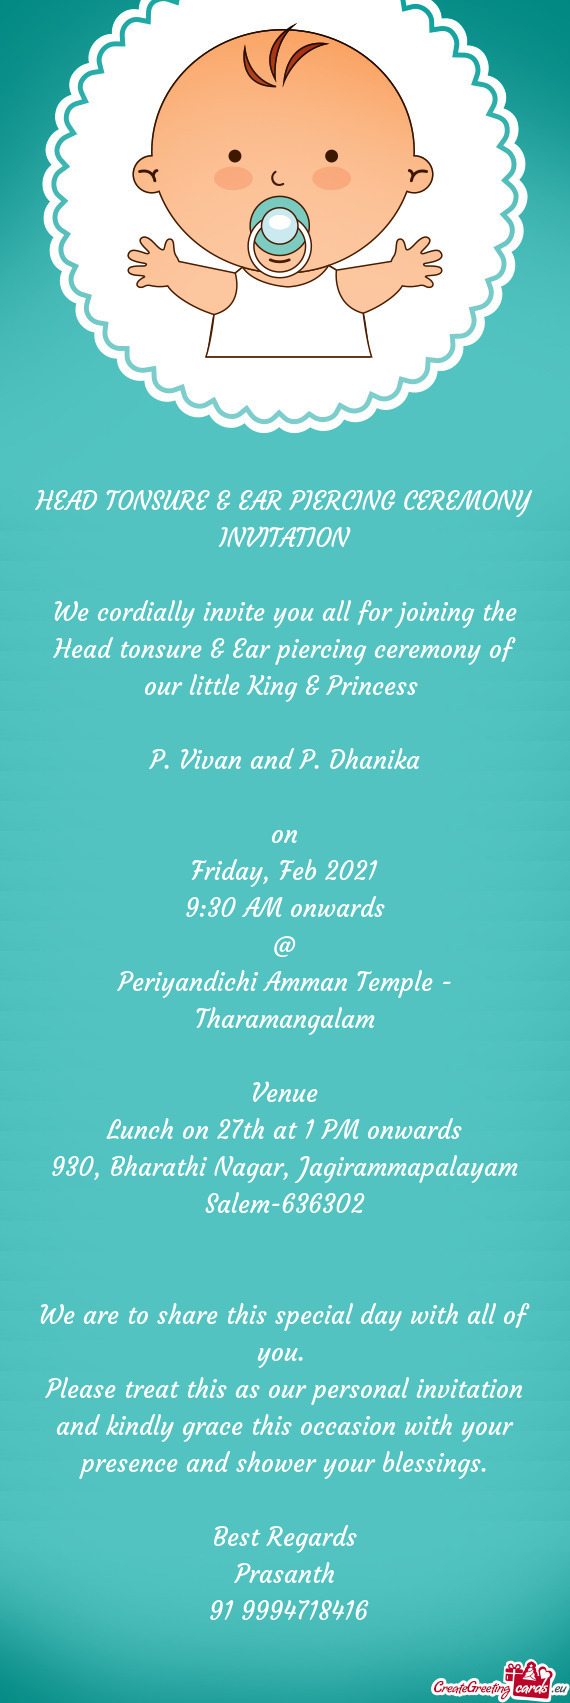 We cordially invite you all for joining the Head tonsure & Ear piercing ceremony of our little King